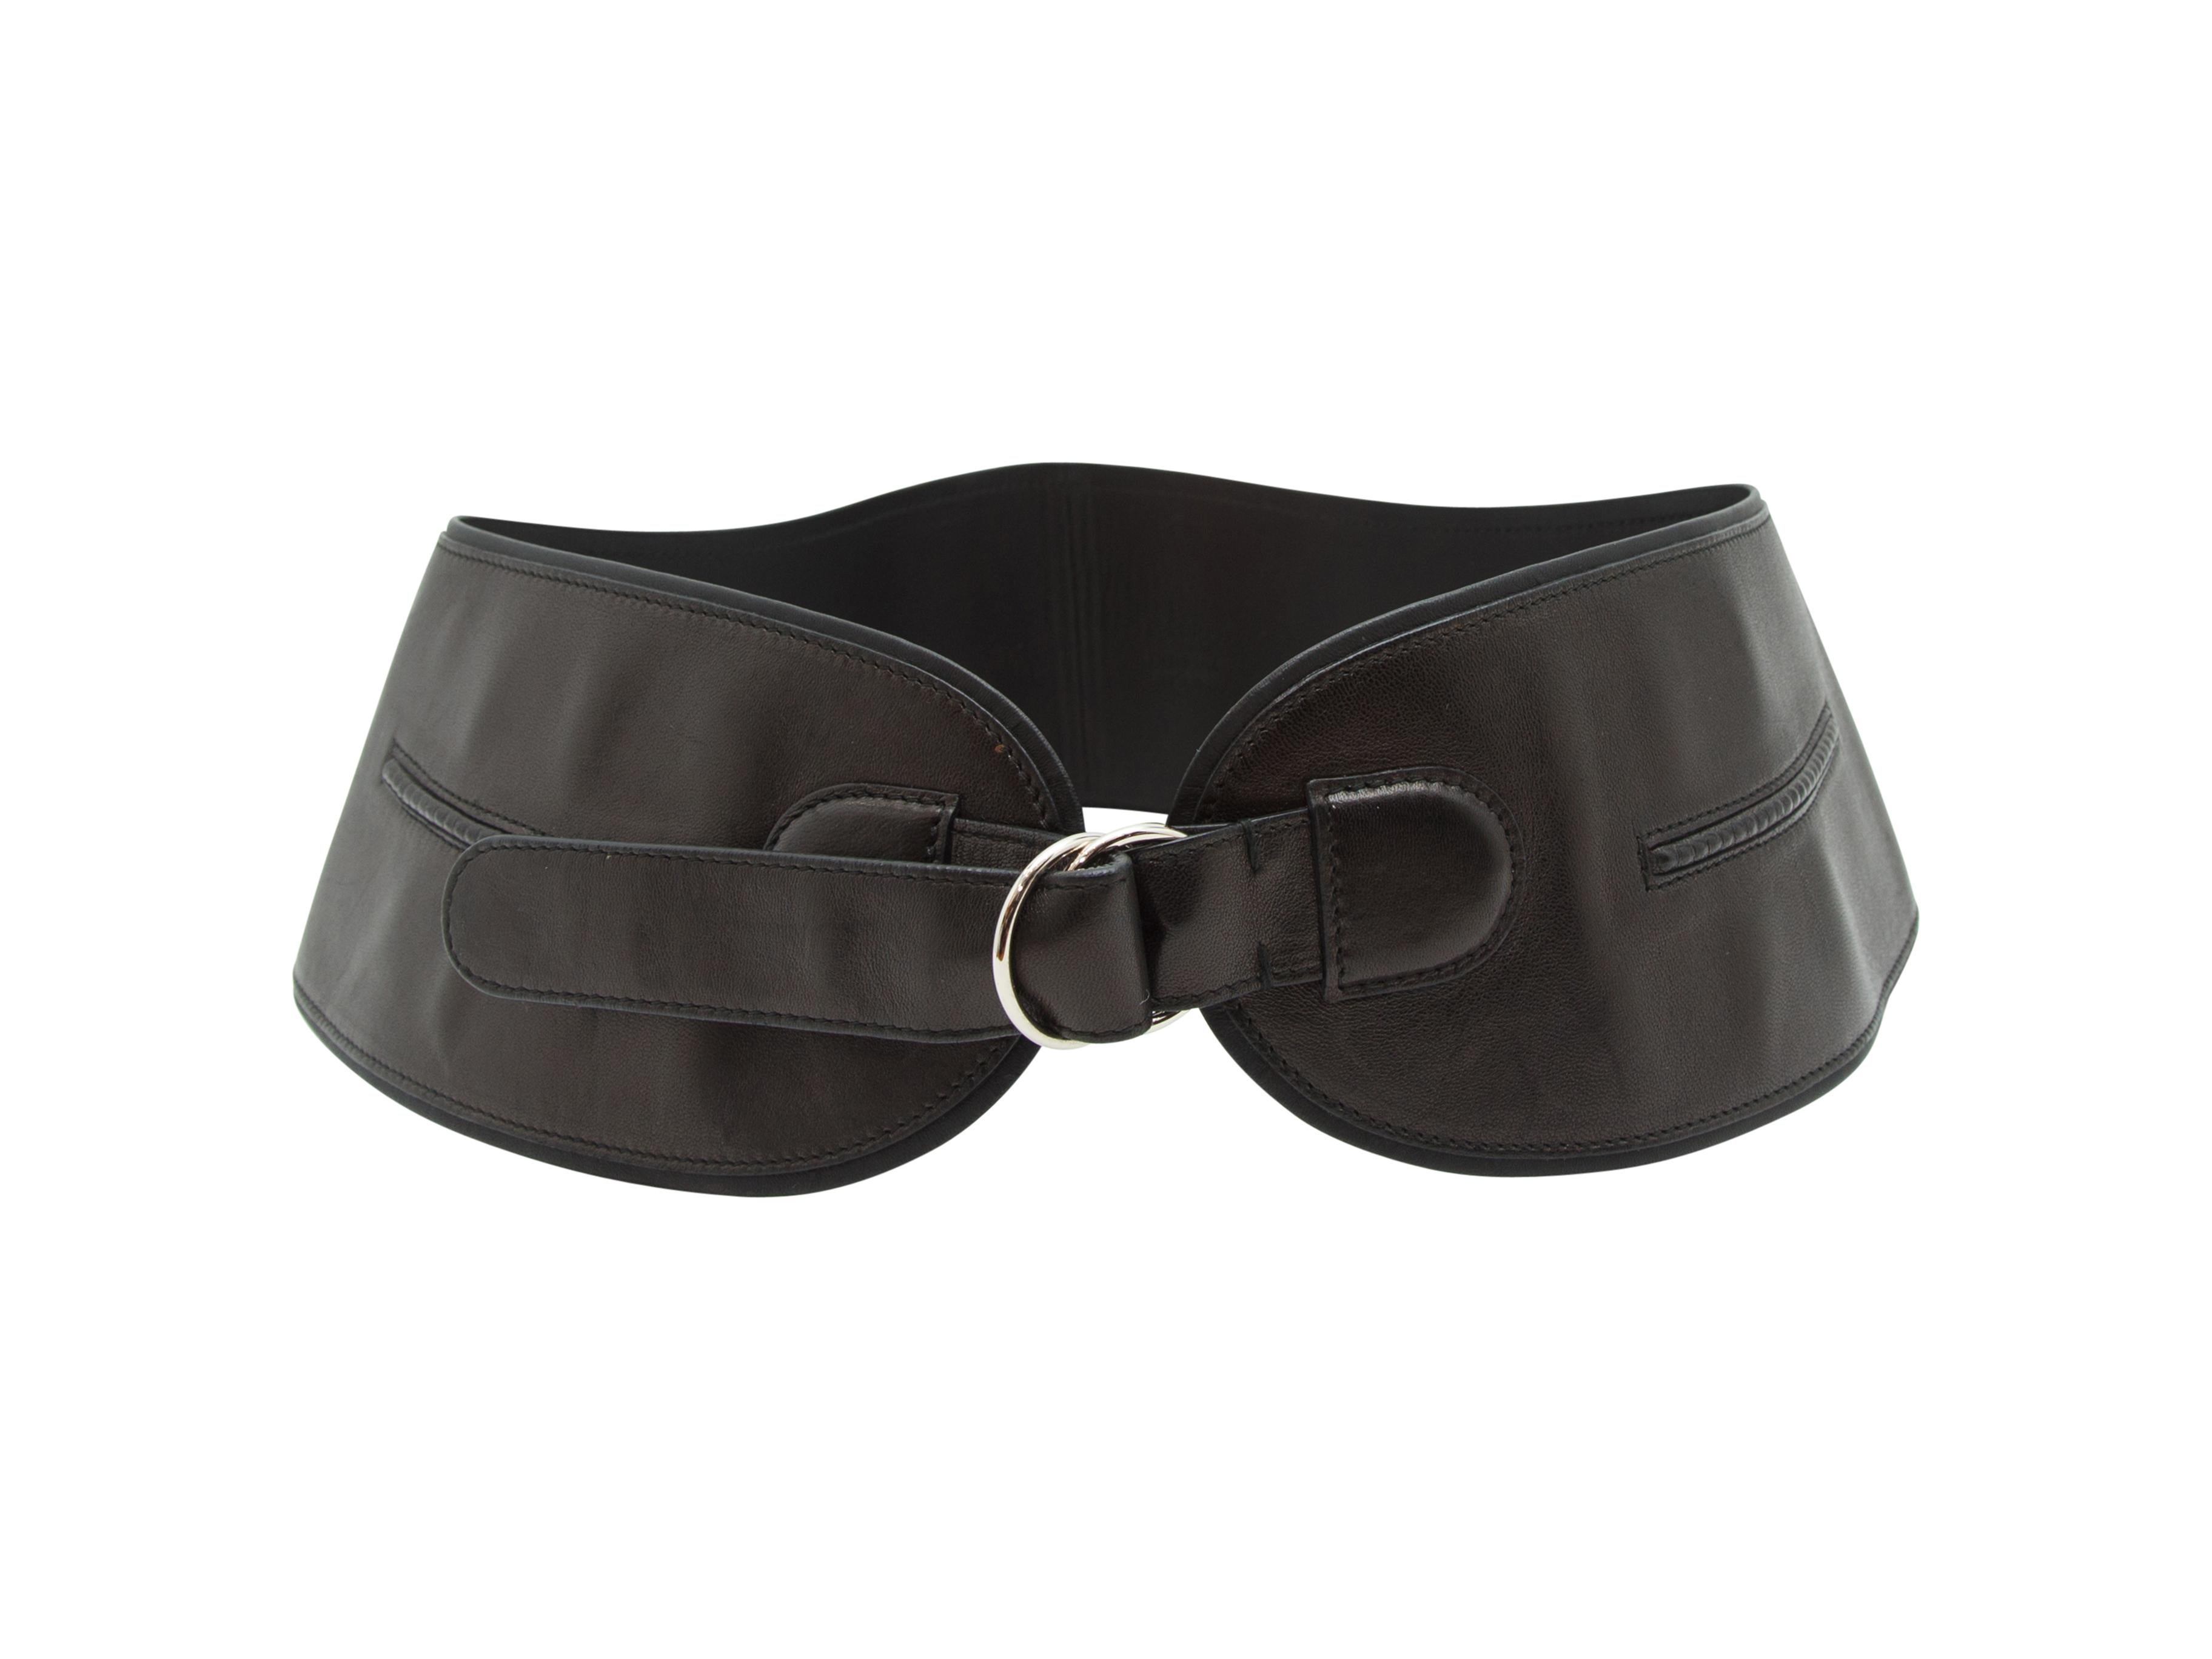 Product details: Black leather wide belt by Yves Saint Laurent. Tonal stitching throughout. Silver-tone D-ring closure at front. 4